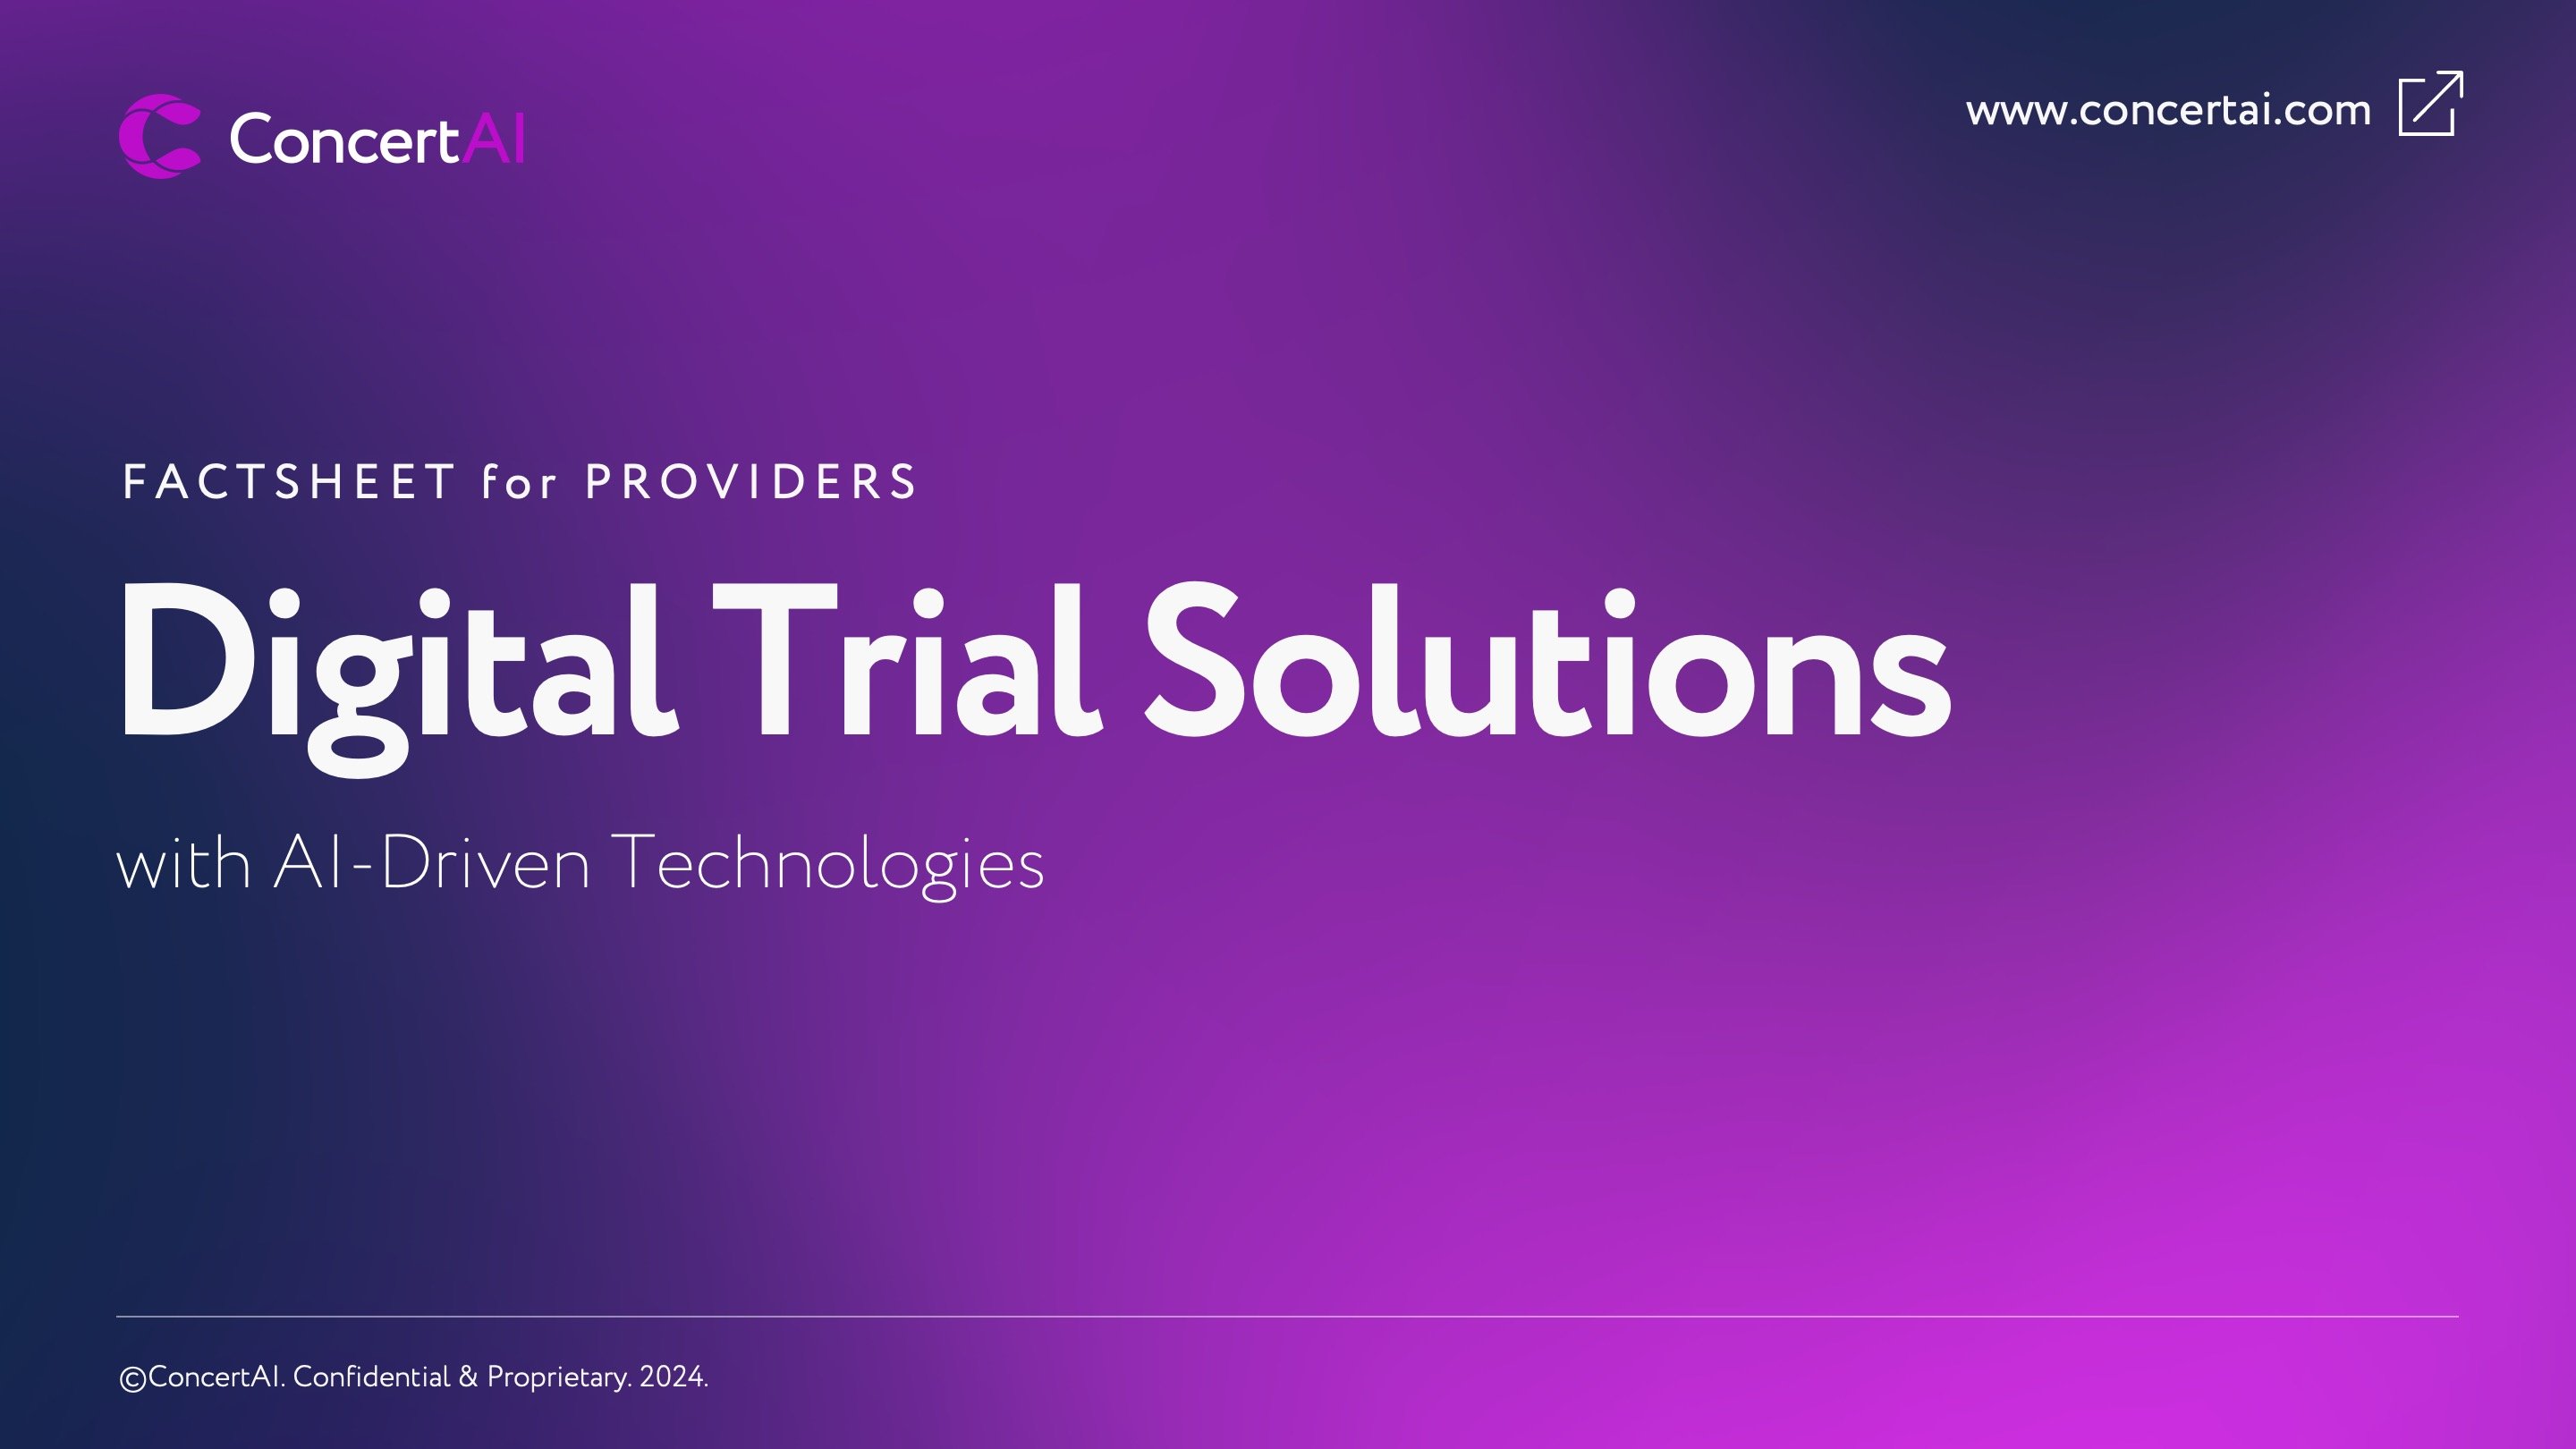 Digital Trial Solutions for Providers